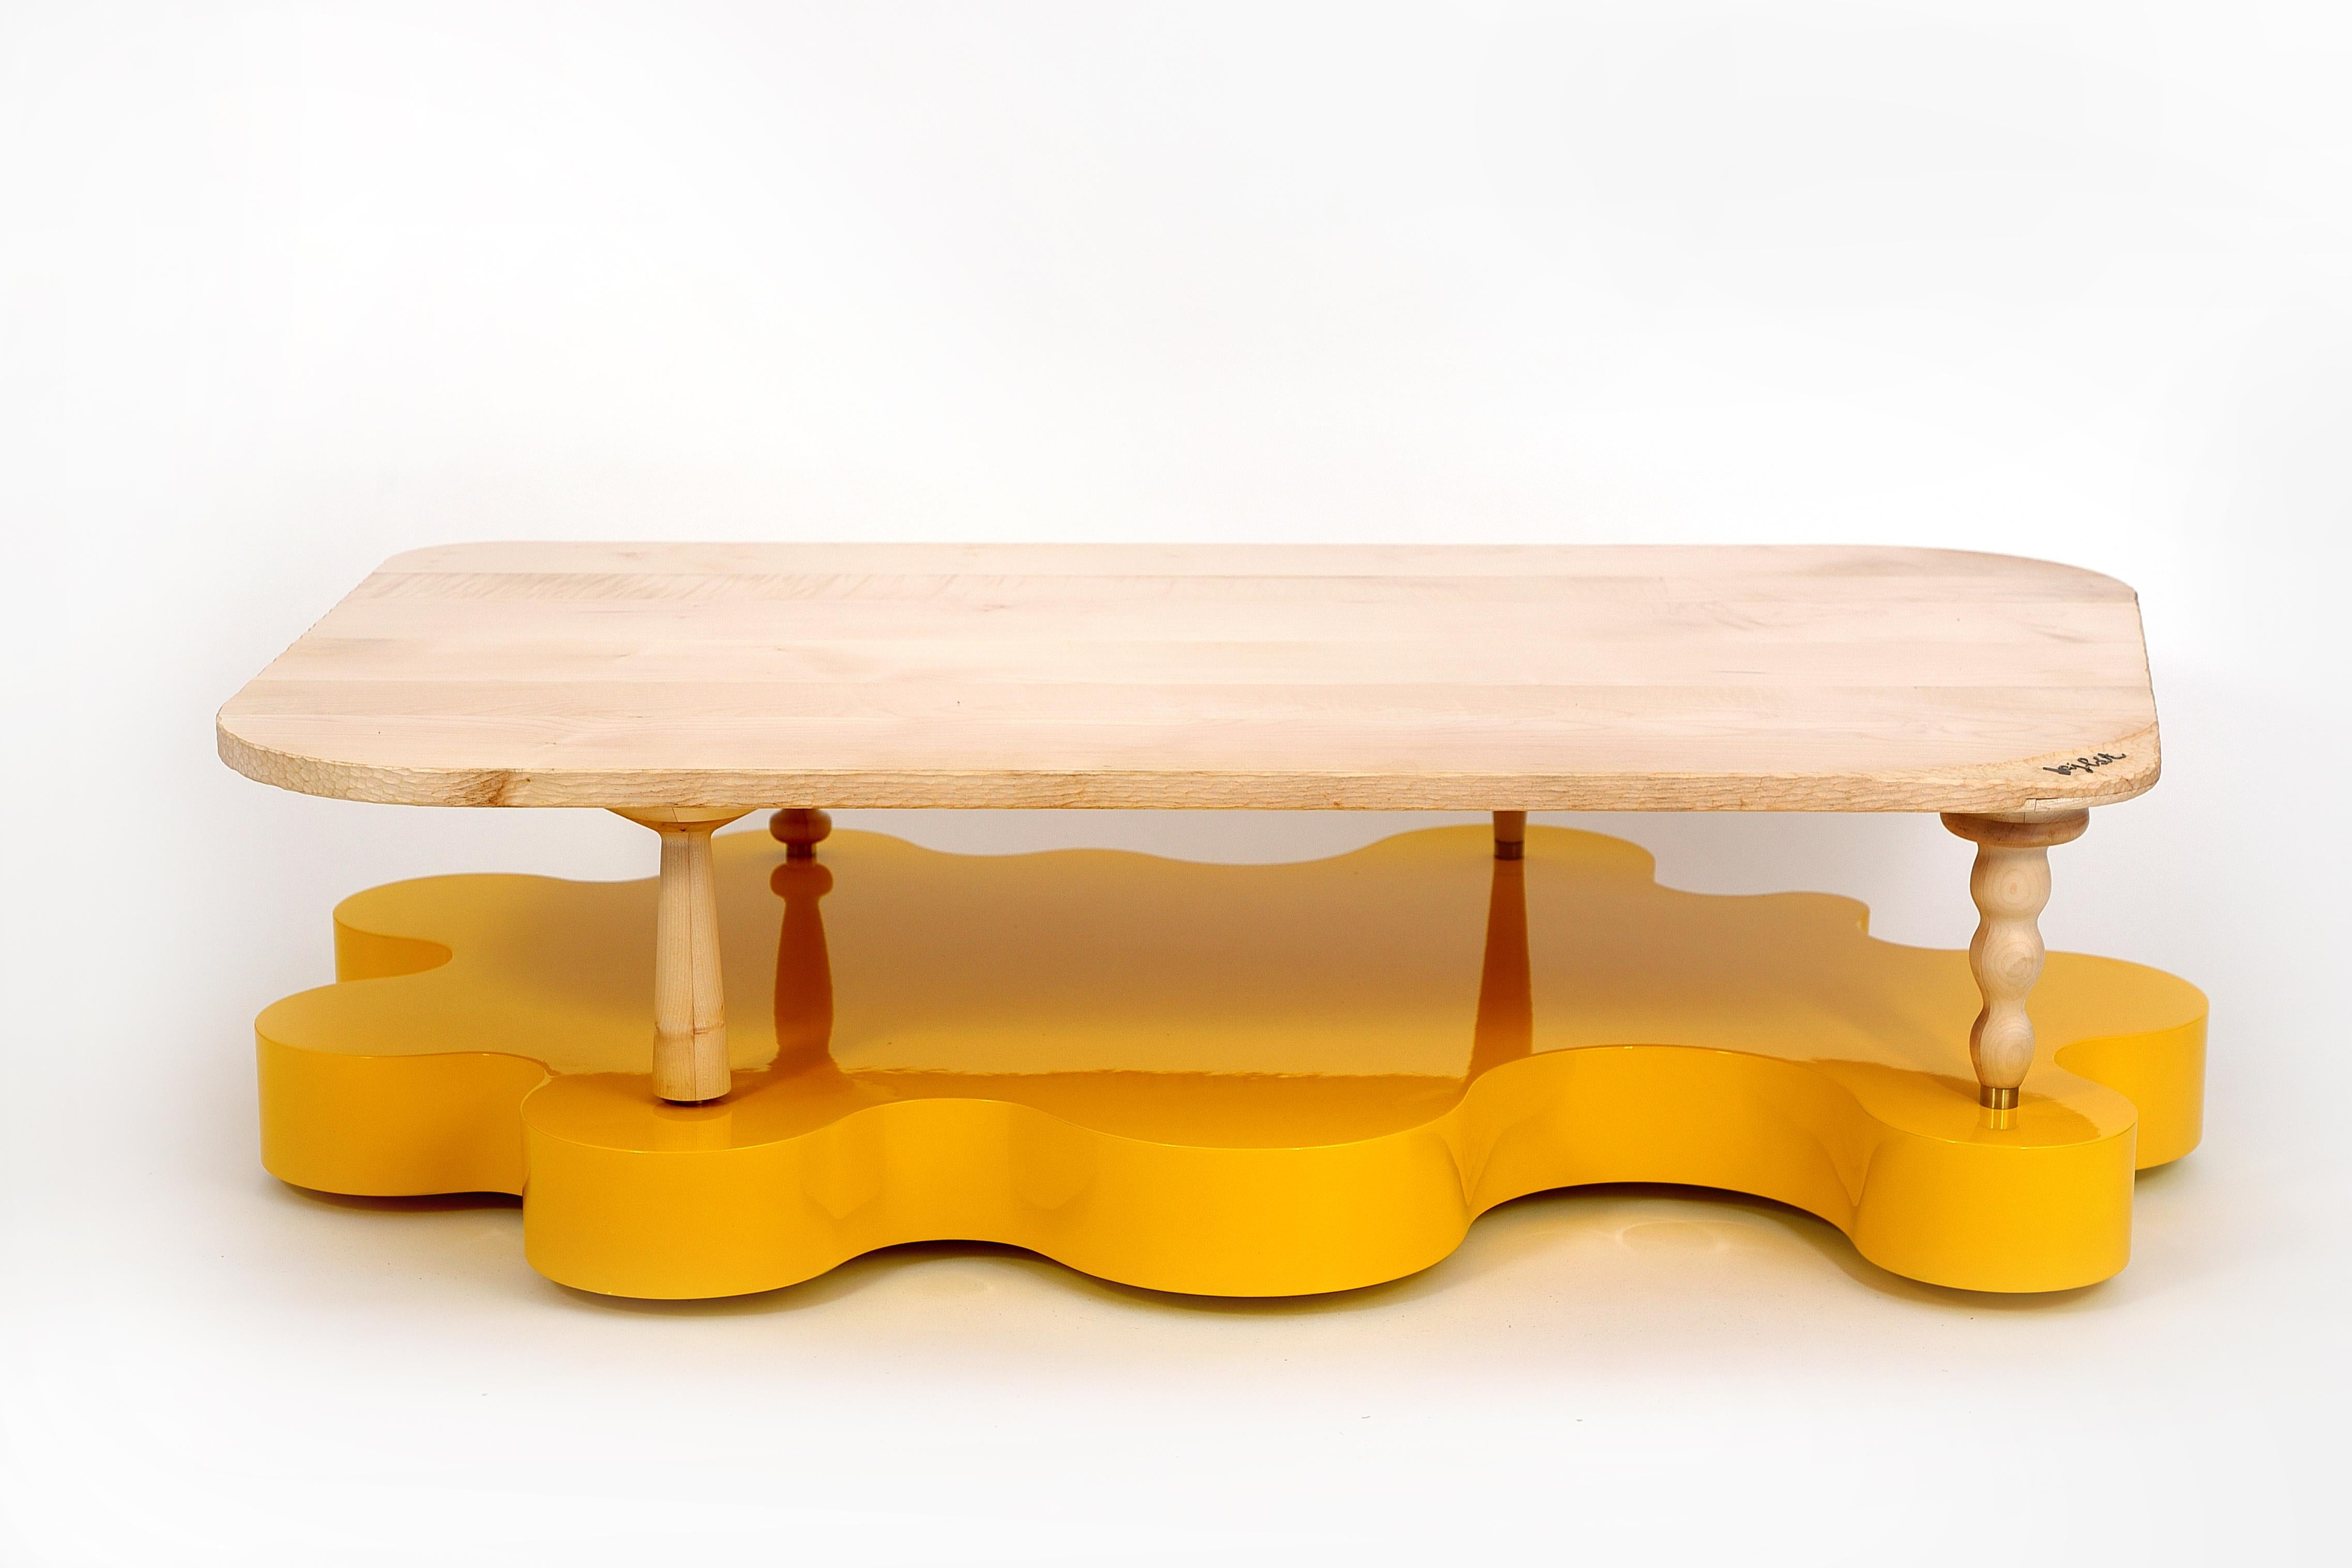 The original, the only one made by the author. At the same time, the author, as with other works, decided that only one table would remain forever. The base of the table has an amorphous shape, which is connected to the trapezoid-shaped wooden board